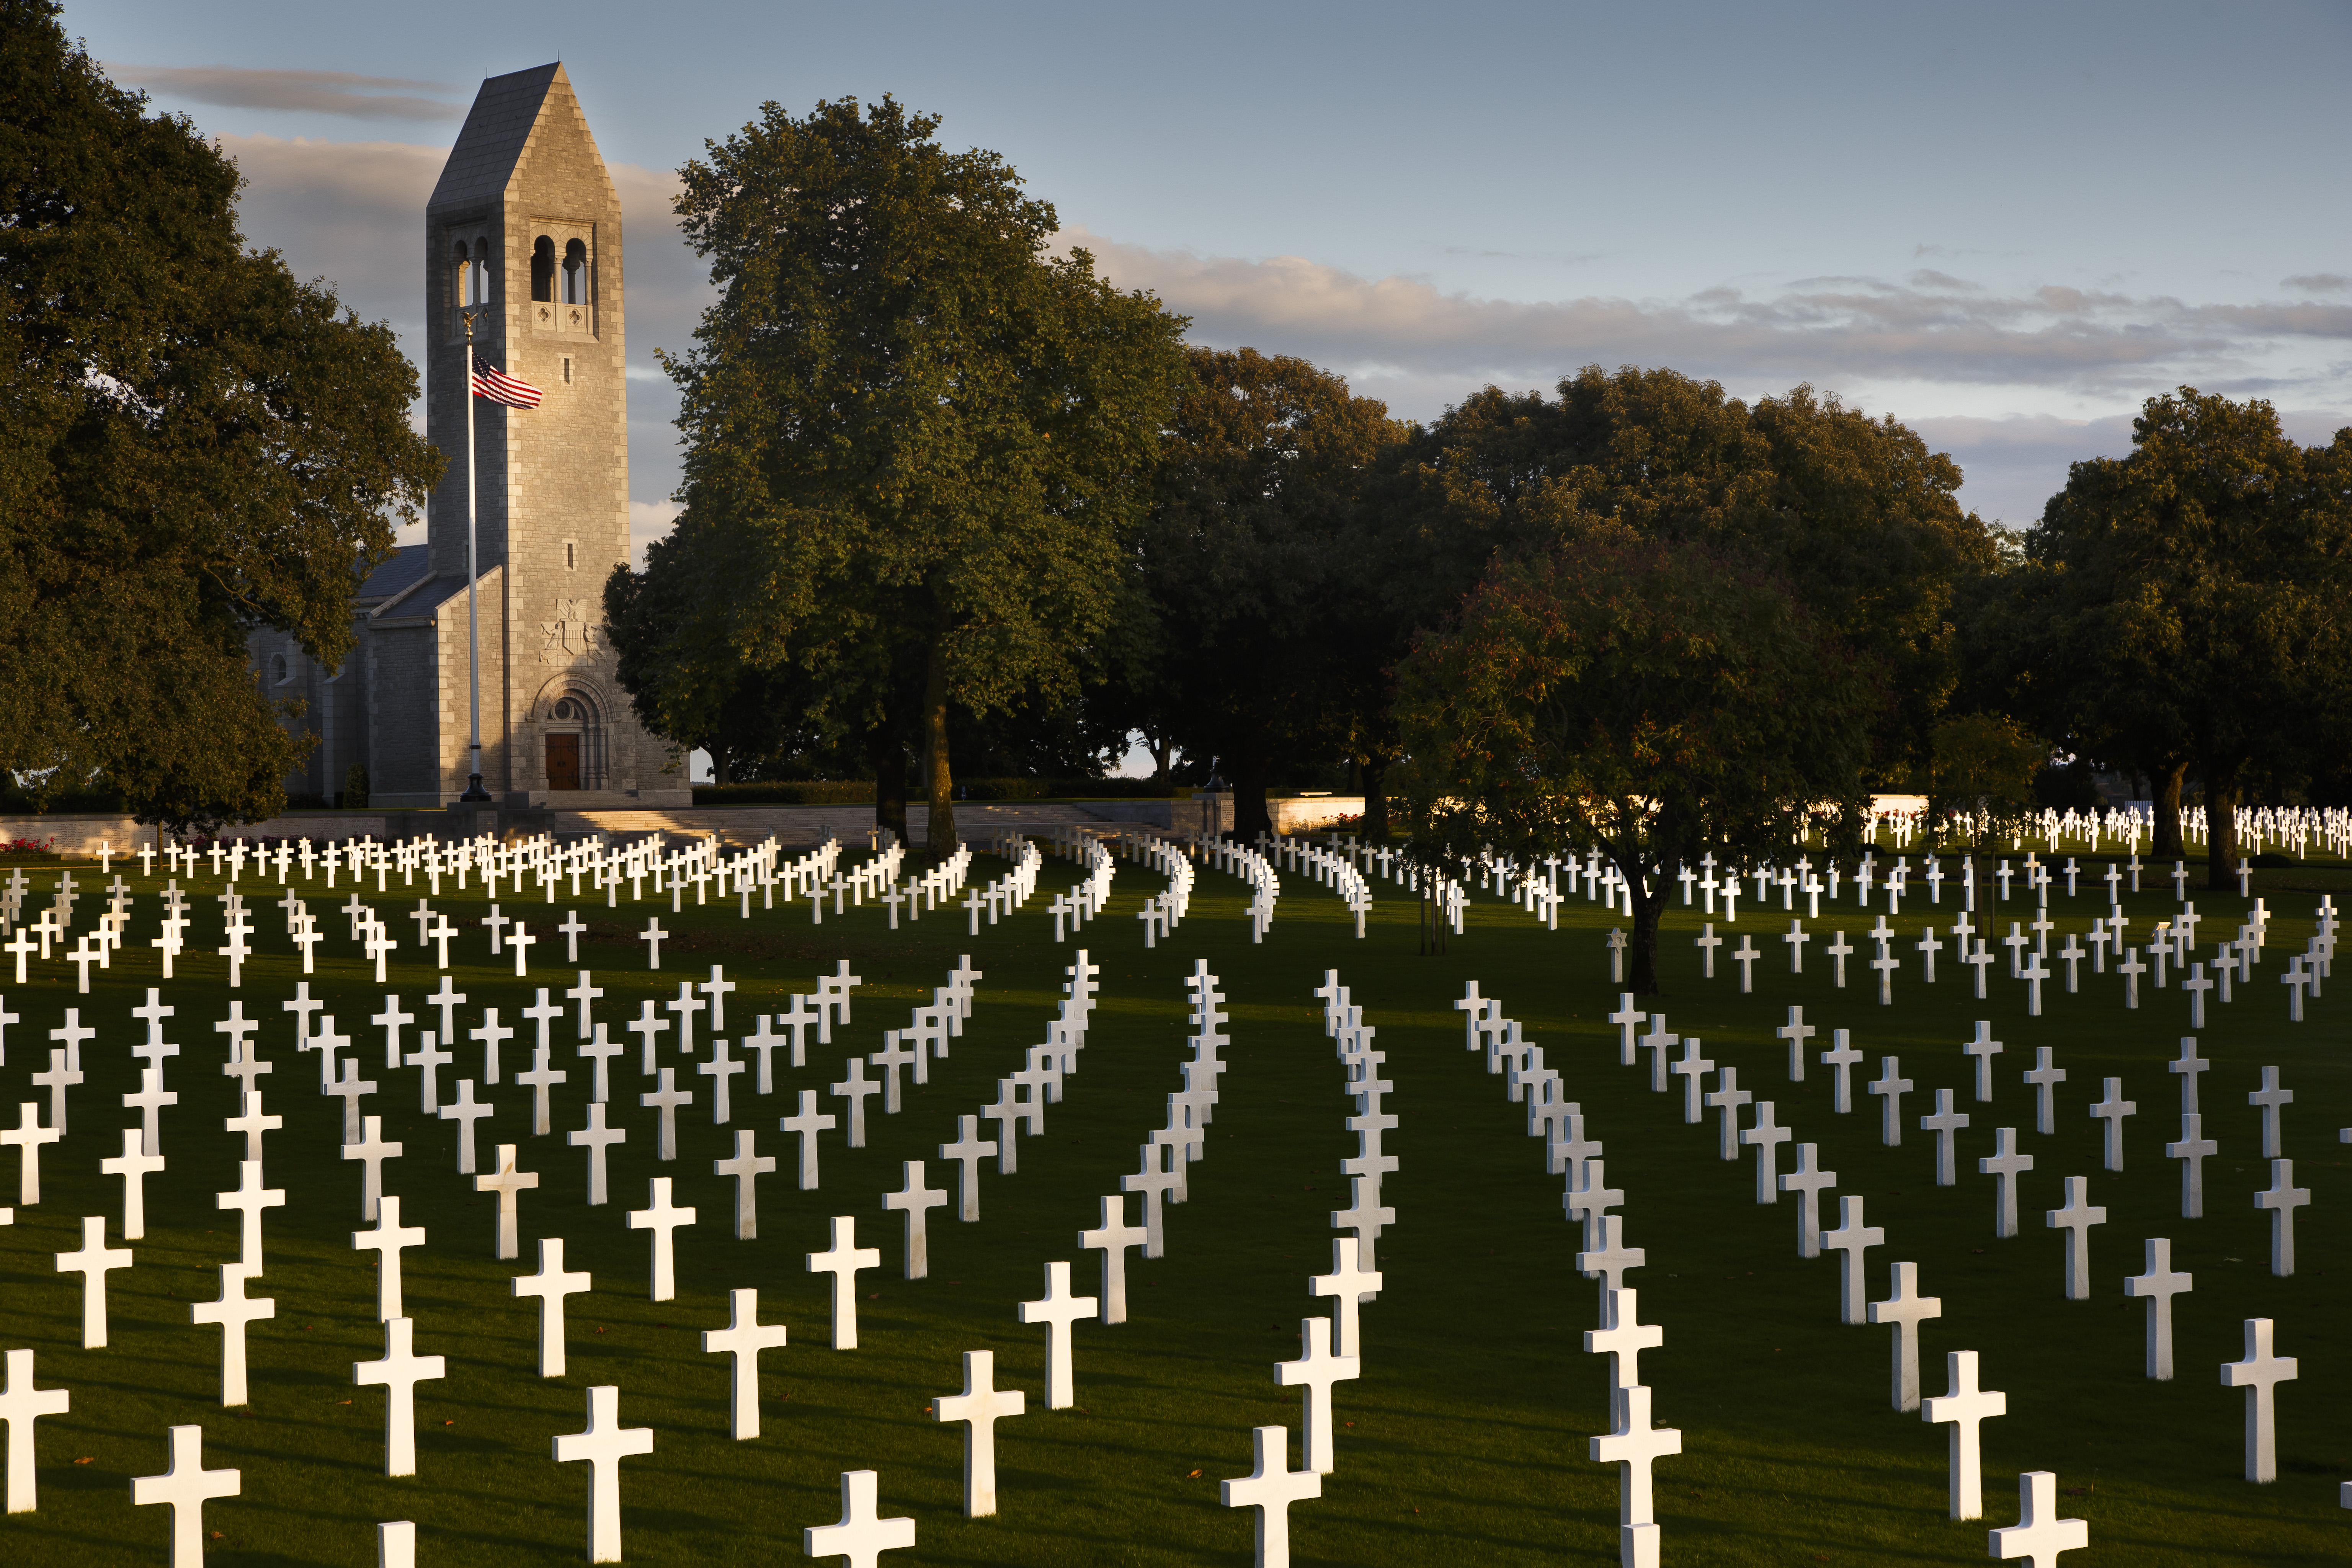 Veterans Day 2019 at Brittany American Cemetery | American Battle